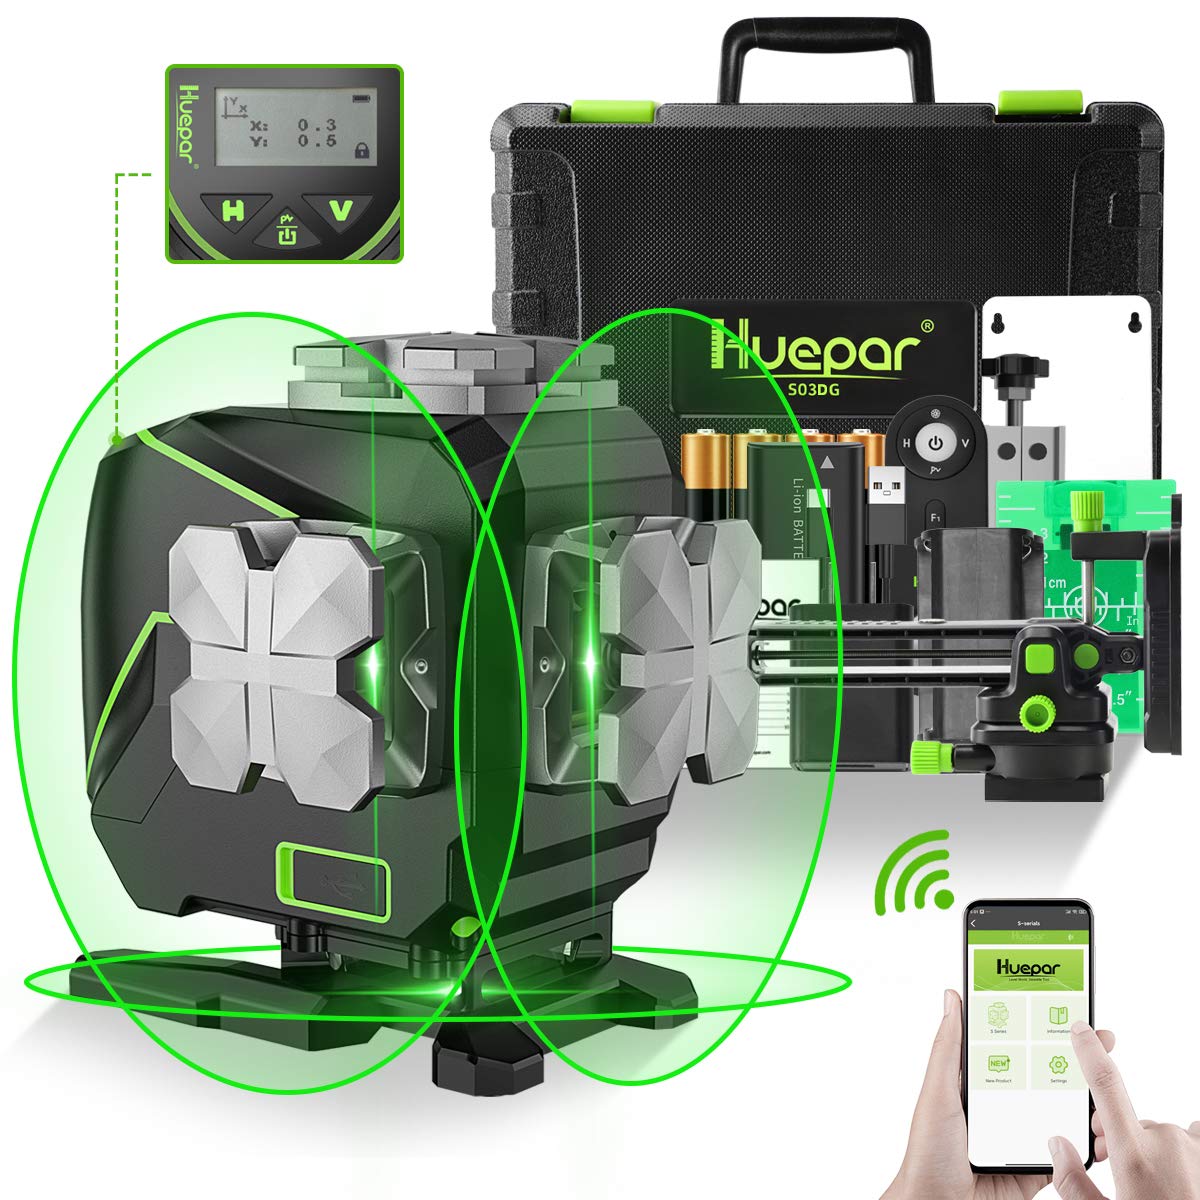 Huepar 3x360° Self-Leveling Laser Level with LCD Screen, 3D Bluetooth Connected Green Beam Cross Line Tiling Floor Laser Tool -360° Horizontal/Vertical Laser Line -Remote Control&Hard Carry Case S03DG